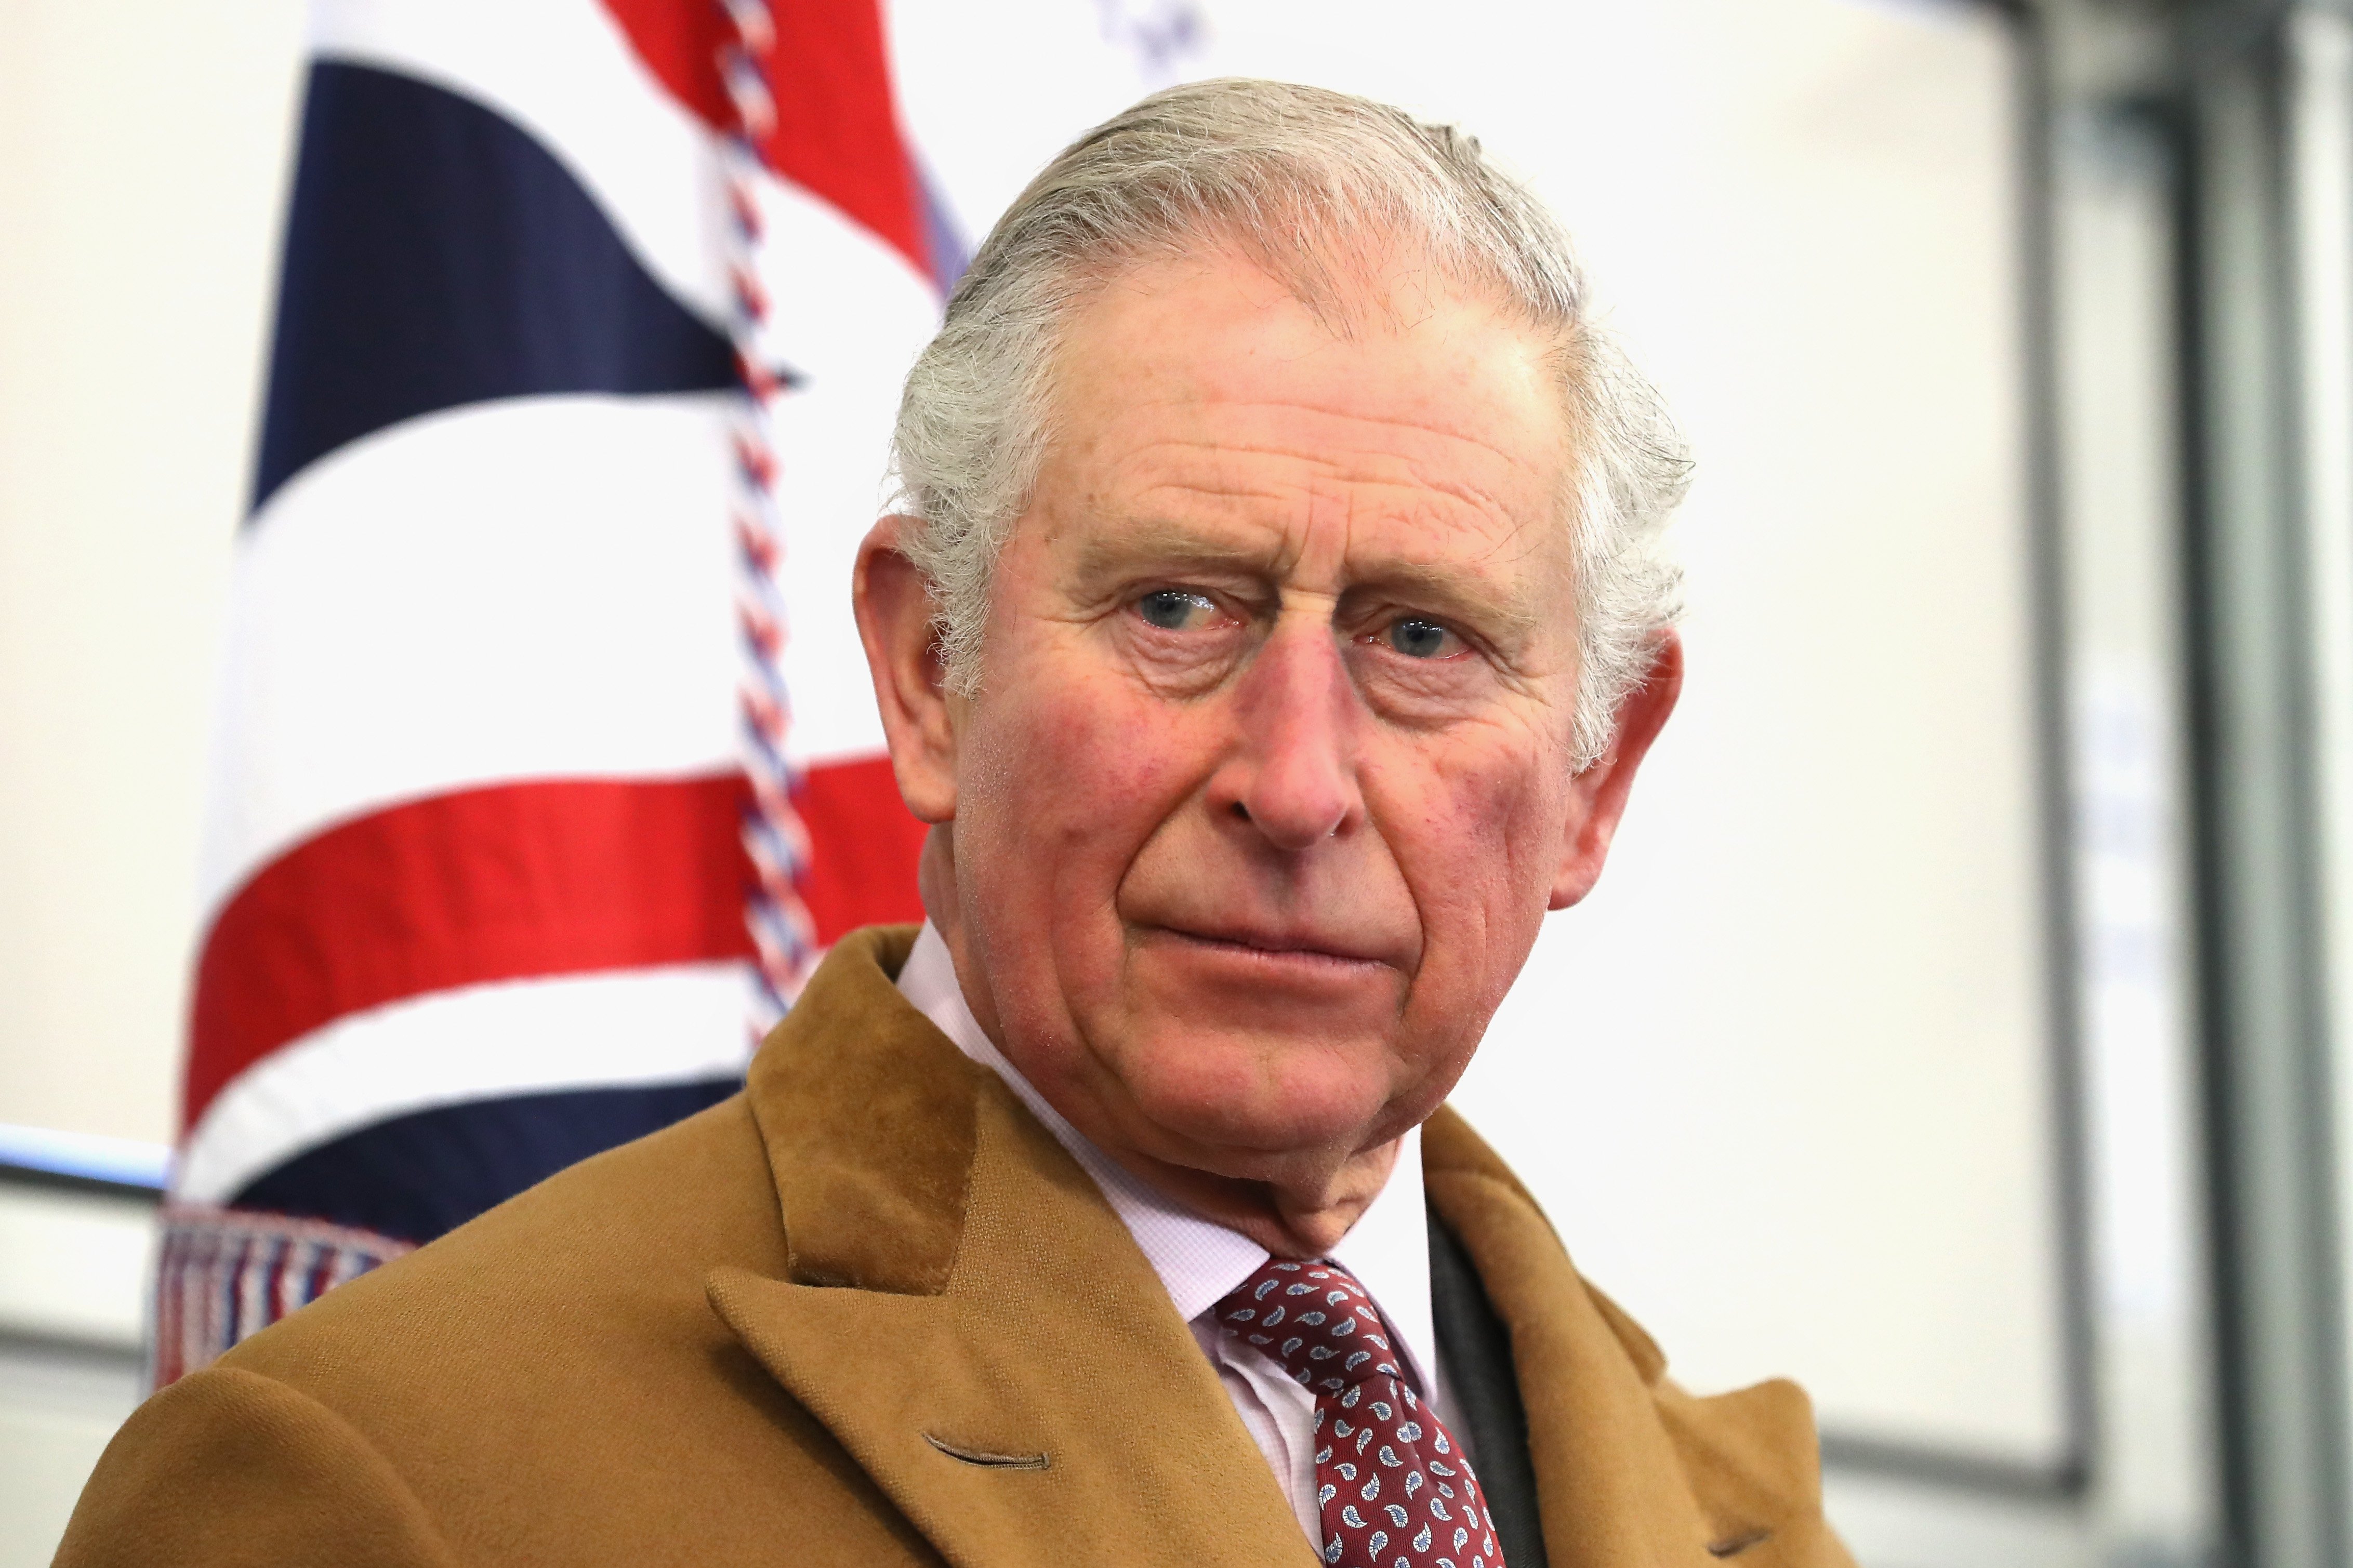 King Charles attends a Service of Thanksgiving to mark the 70th Anniversary of VE Day at Westminster Abbey on May 10, 2015, in London, England. | Source: Getty Images